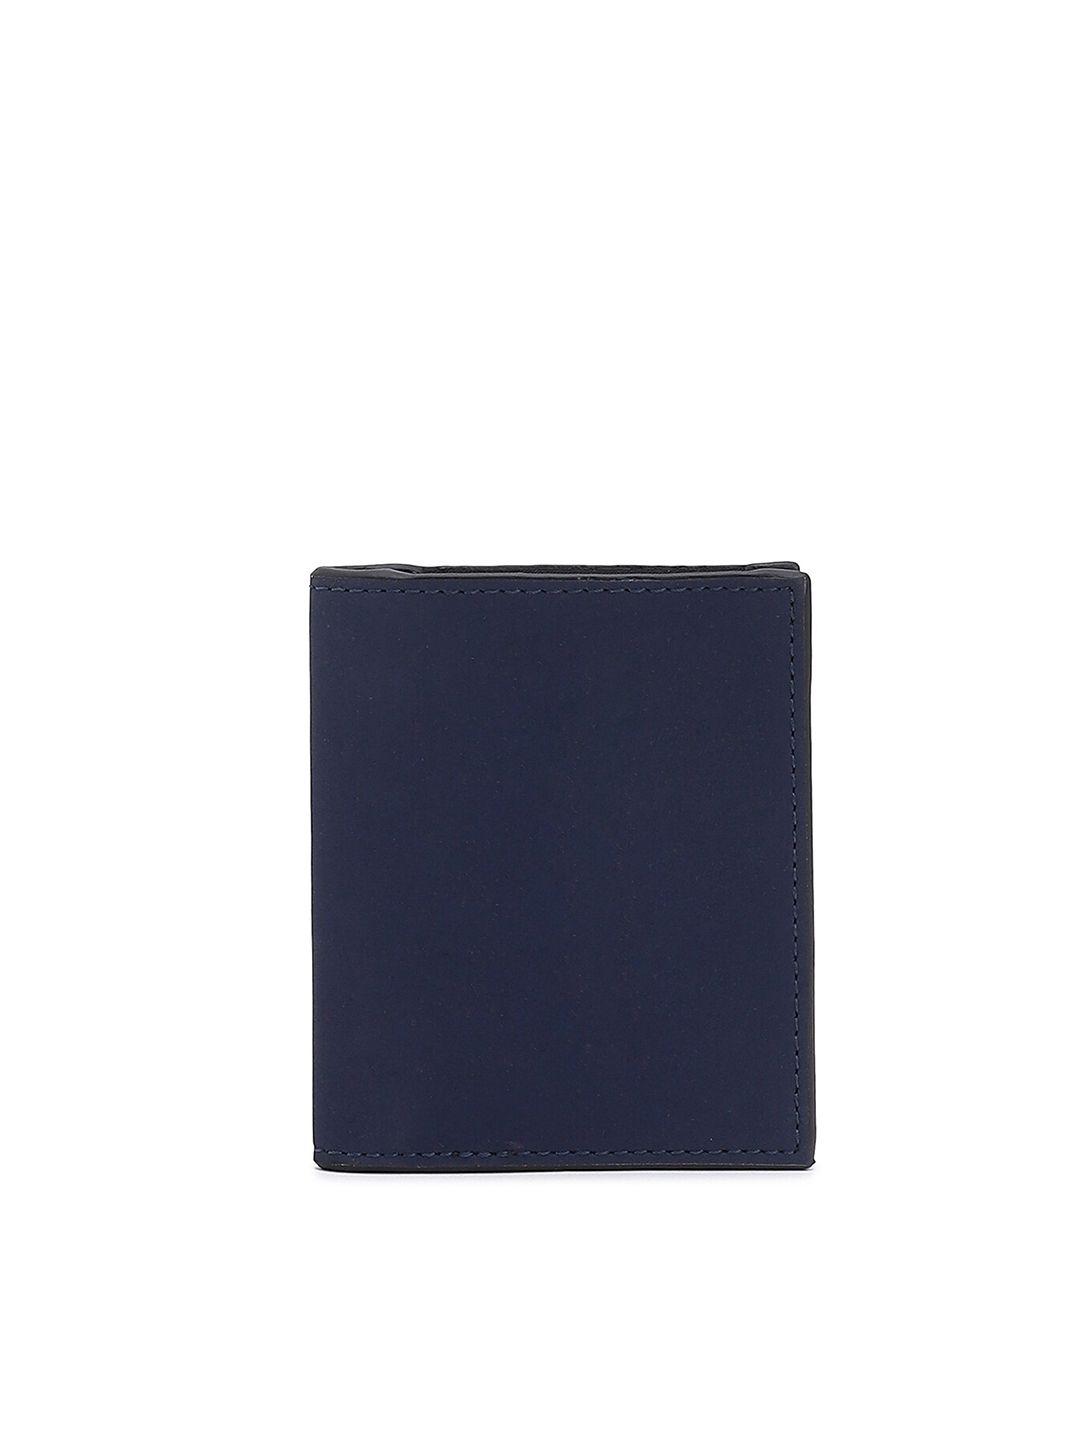 forever 21 women navy blue pu two fold wallet